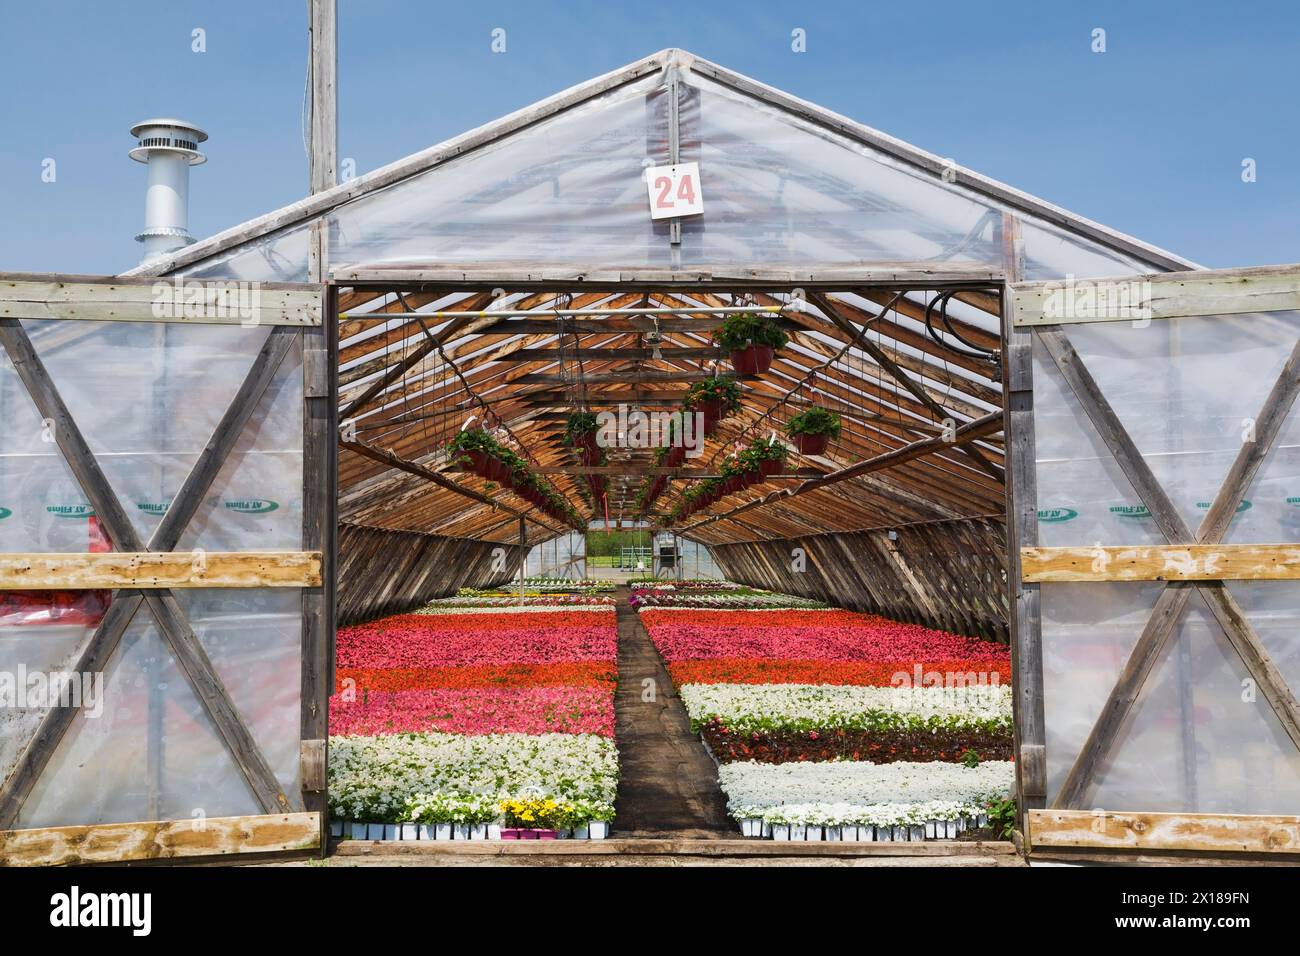 Opened doors on a greenhouse with white, pink and red flowering Begonia plants being grown in containers in spring, Quebec, Canada Stock Photo